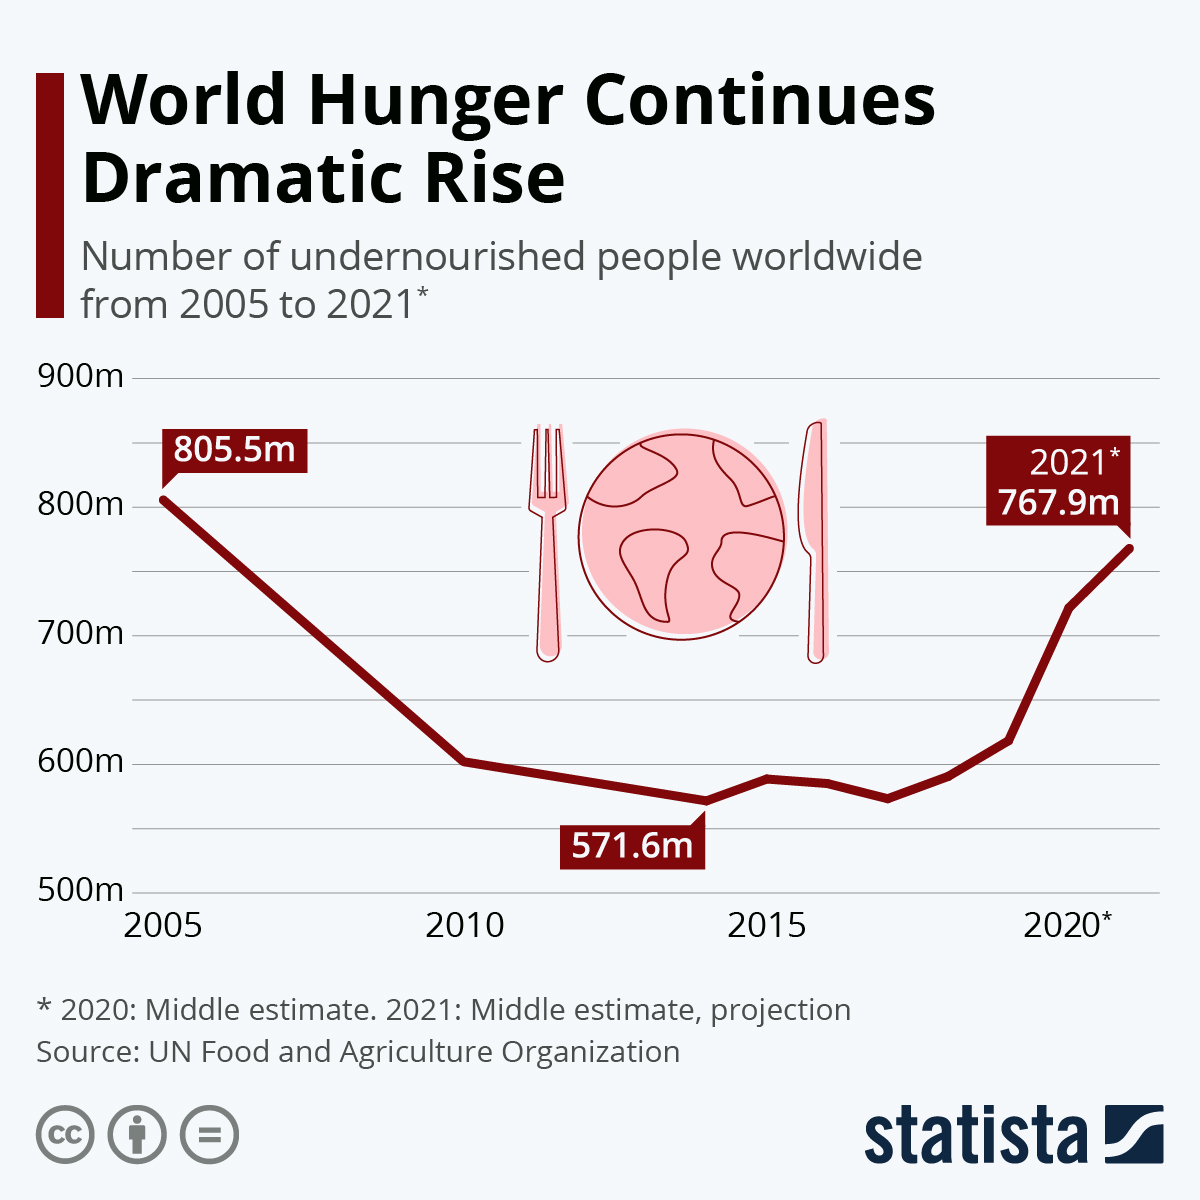 Chart showing the number of malnourished people worldwide from 2005 to 2021, according to the United Nations Food and Agriculture Organization (FAO).